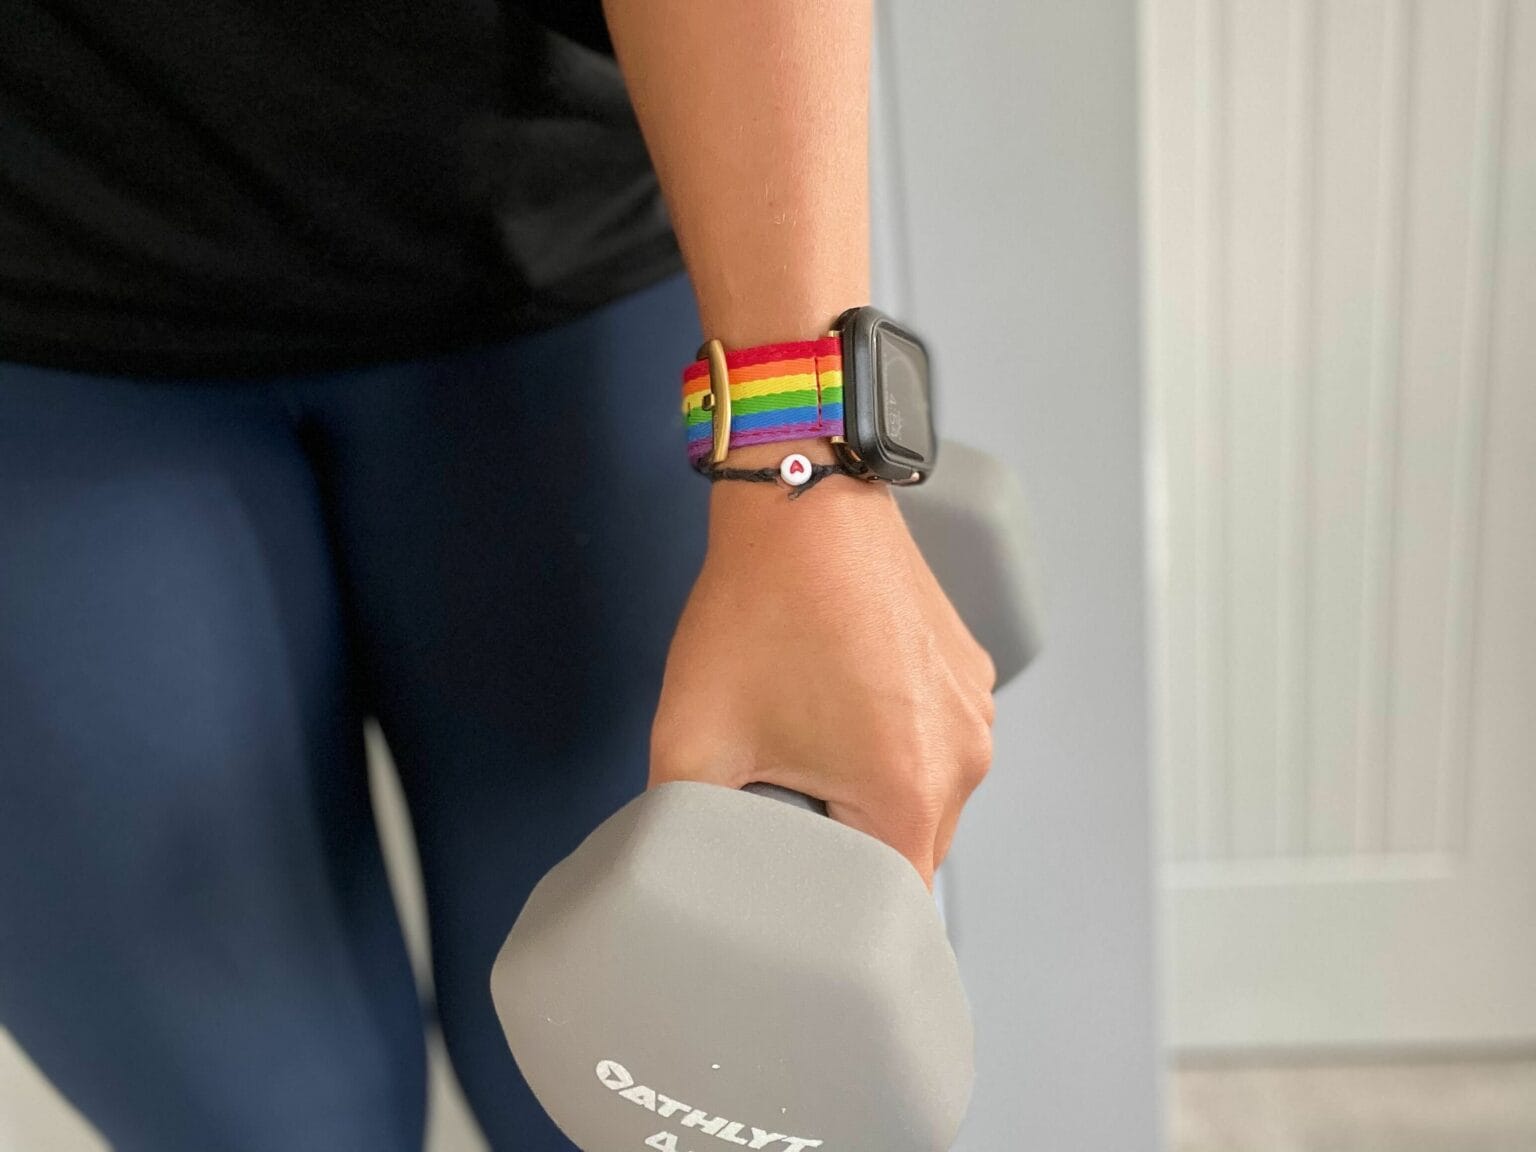 Rainbow nylon Apple Watch bands are great for Pride and for workouts.